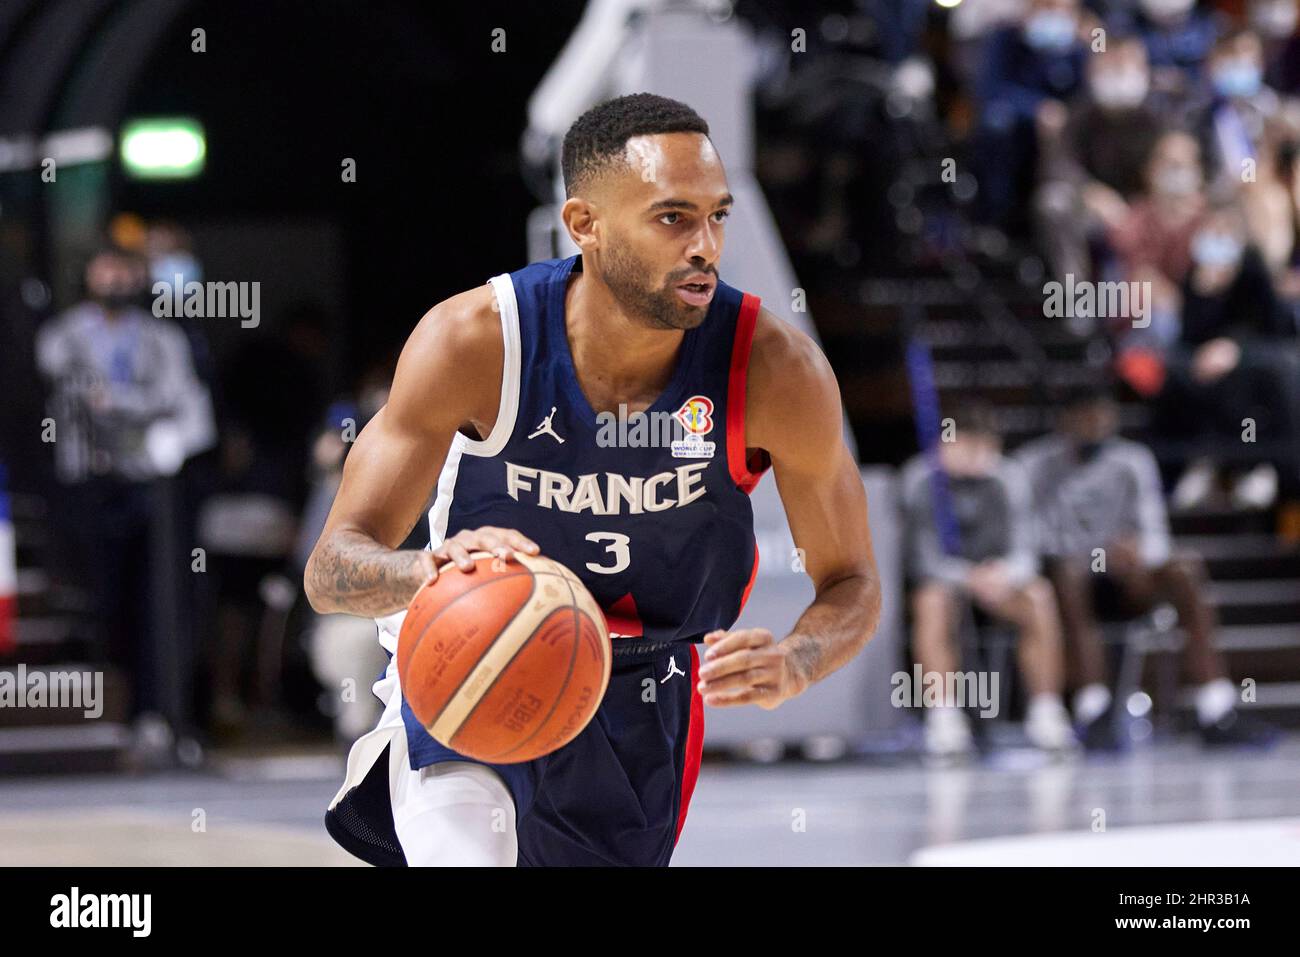 David MICHINEAU (3) of France during the FIBA World Cup 2023, European  qualifiers, 1st round Group E Basketball match between France and Portugal  on February 24, 2022 at Palais des Sports Jean-Michel